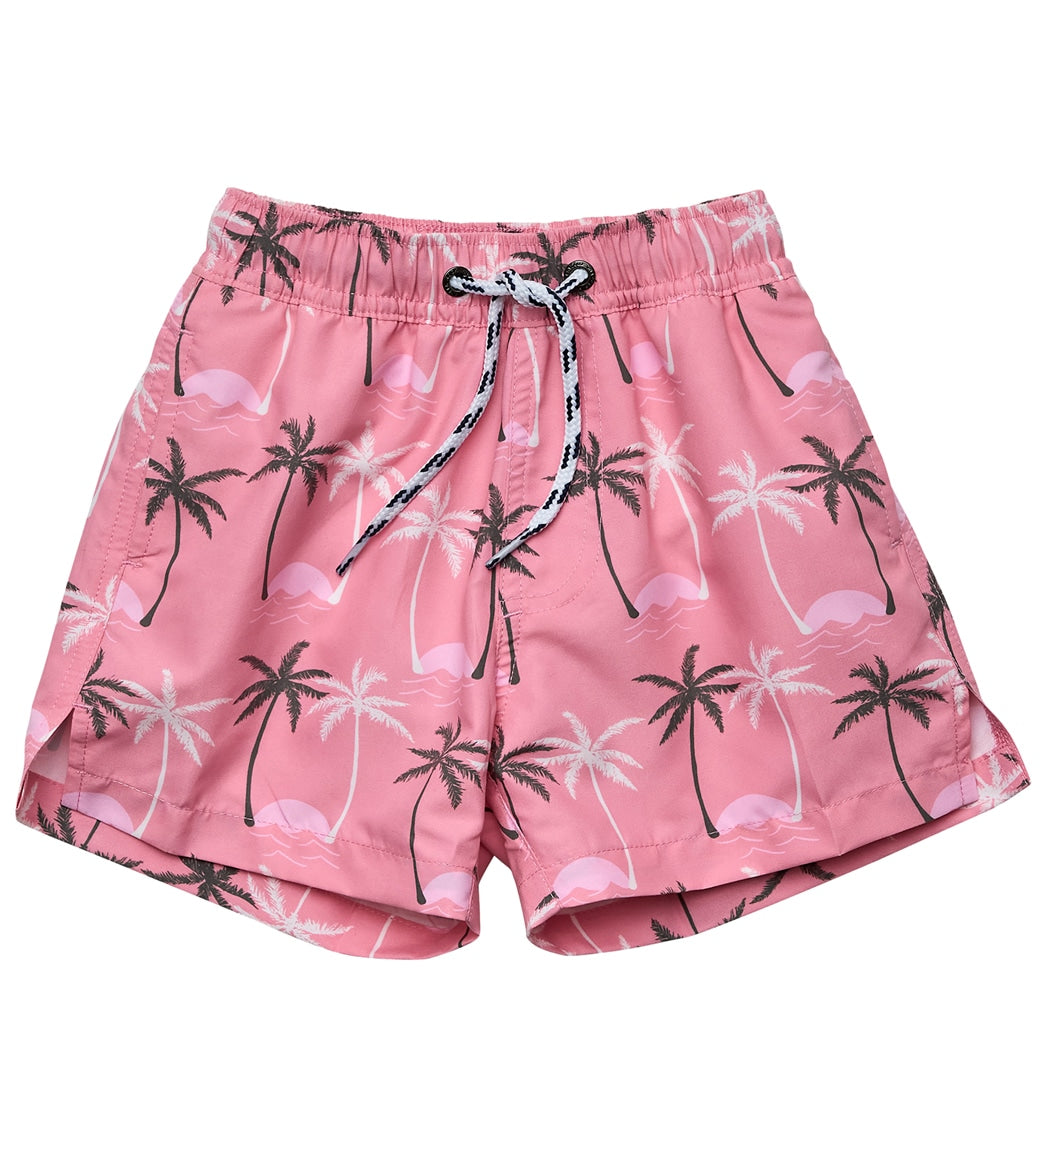 Snapper Rock Boys Palm Paradise Sustainable Volley Shorts (Toddler, Little Kid, Big Kid)